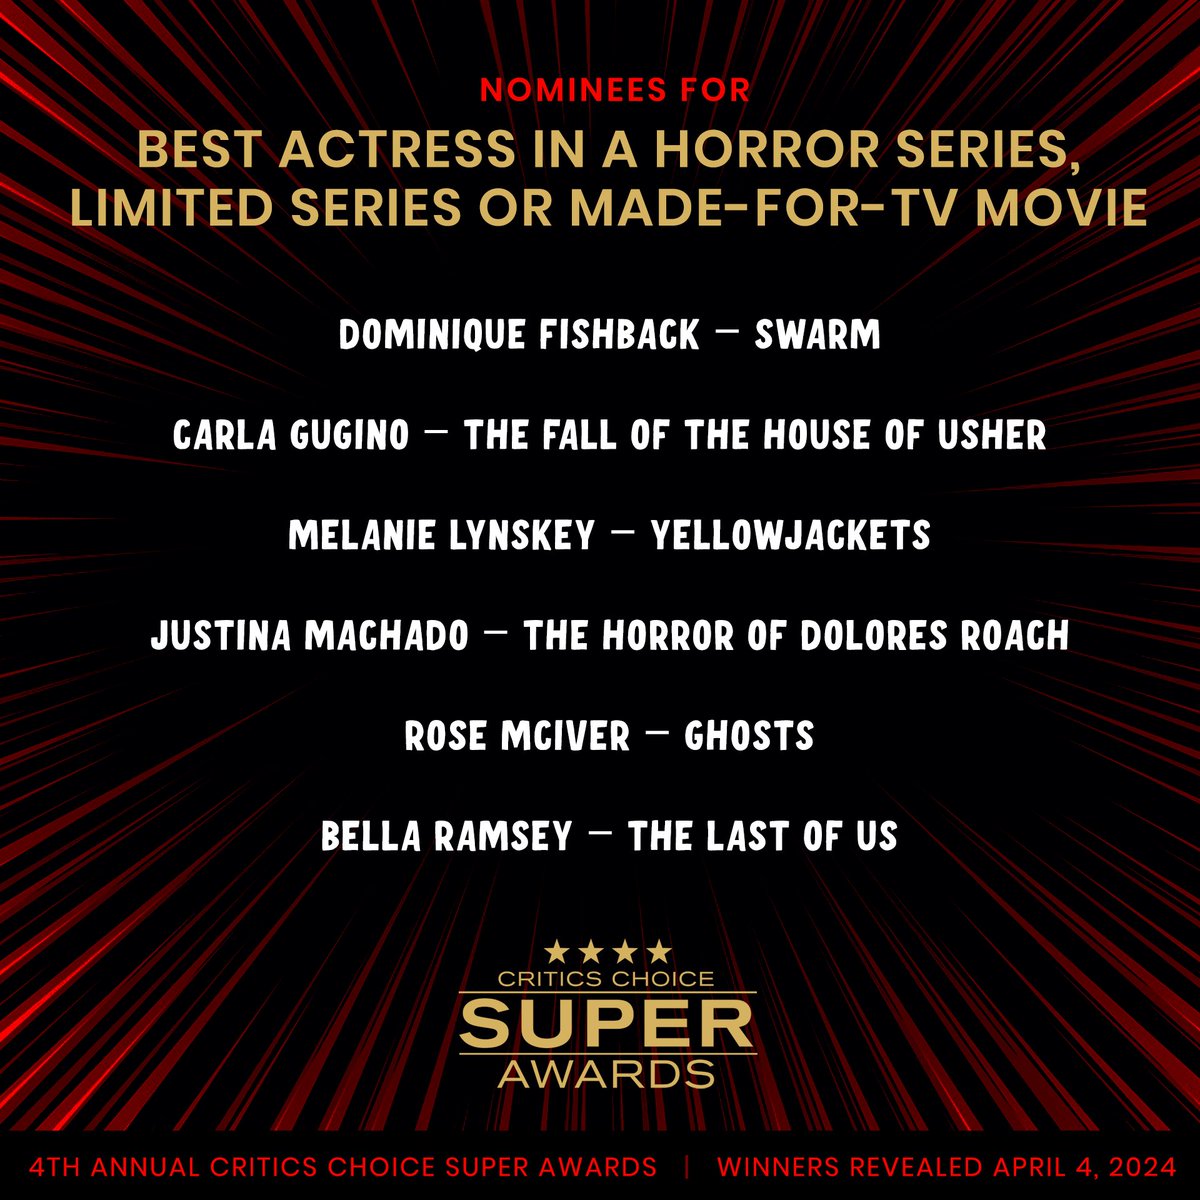 Congratulations to our Critics Choice Super Awards 'BEST ACTRESS IN A HORROR SERIES, LIMITED SERIES OR MADE-FOR-TV MOVIE' nominees! Winners will be announced April 4th, 2024.⭐️⭐️⭐️⭐️ #CriticsChoice #CCSuperAwards